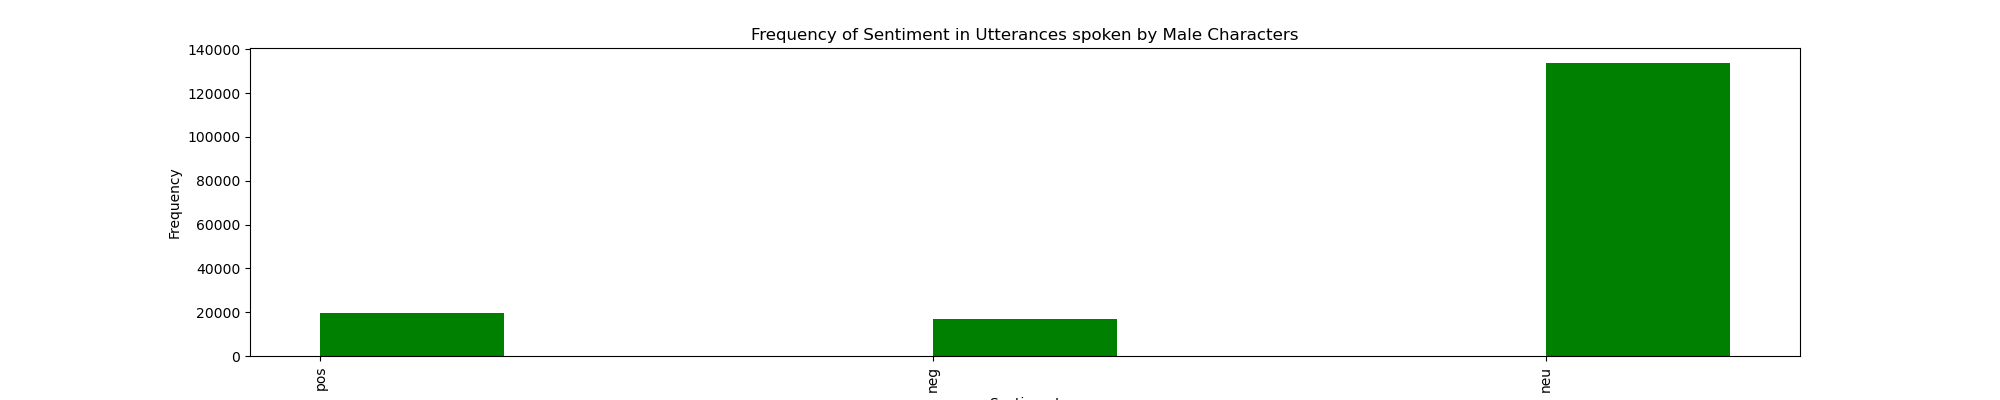 male_sentiment.png